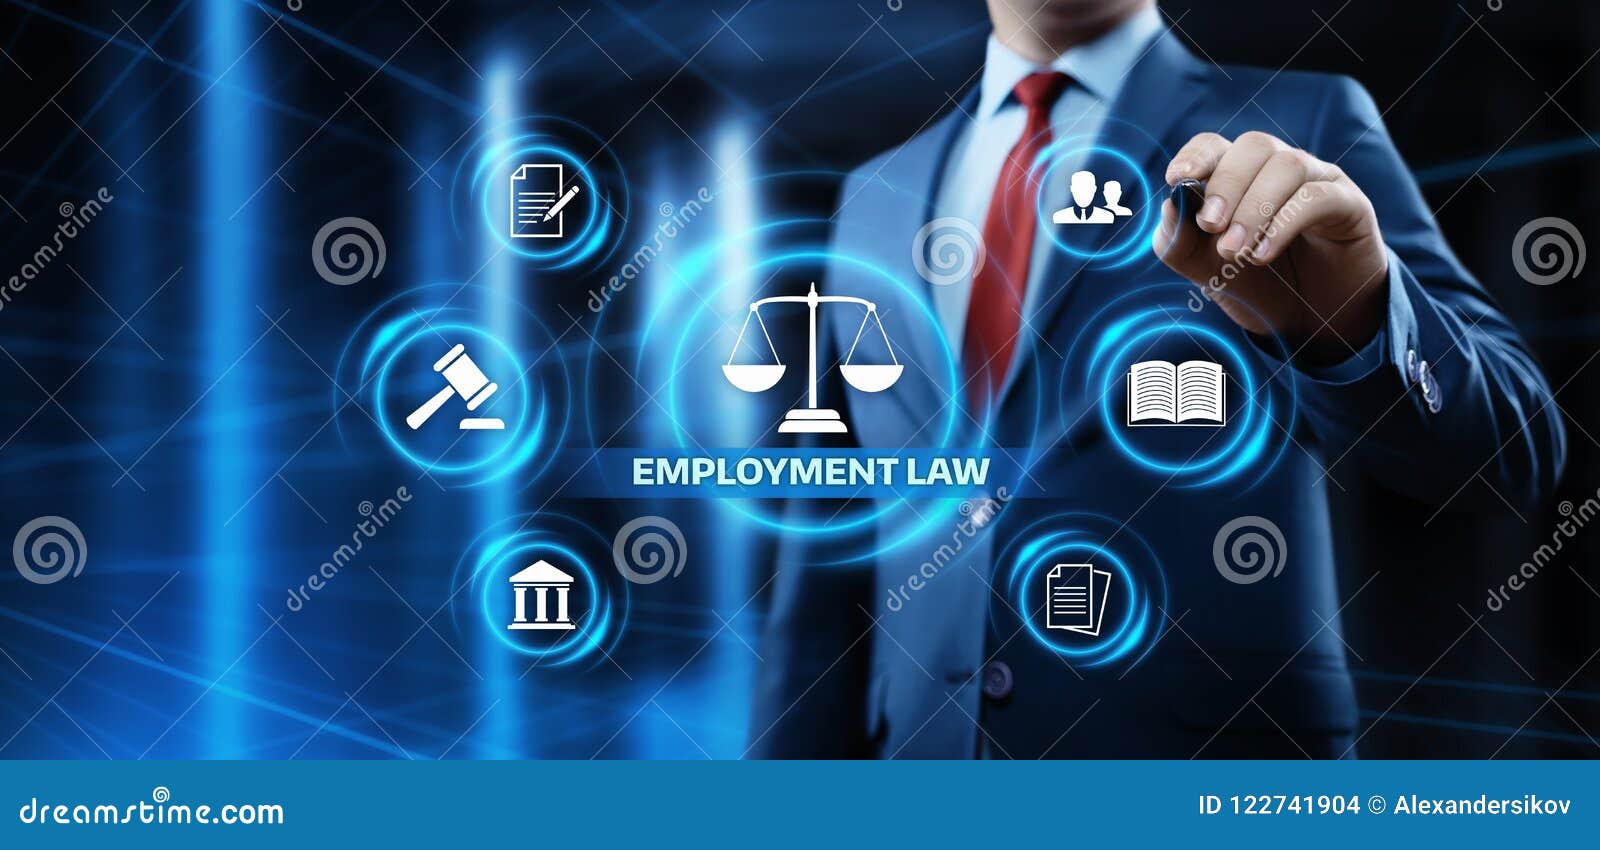 employment law legal rules lawyer business concept